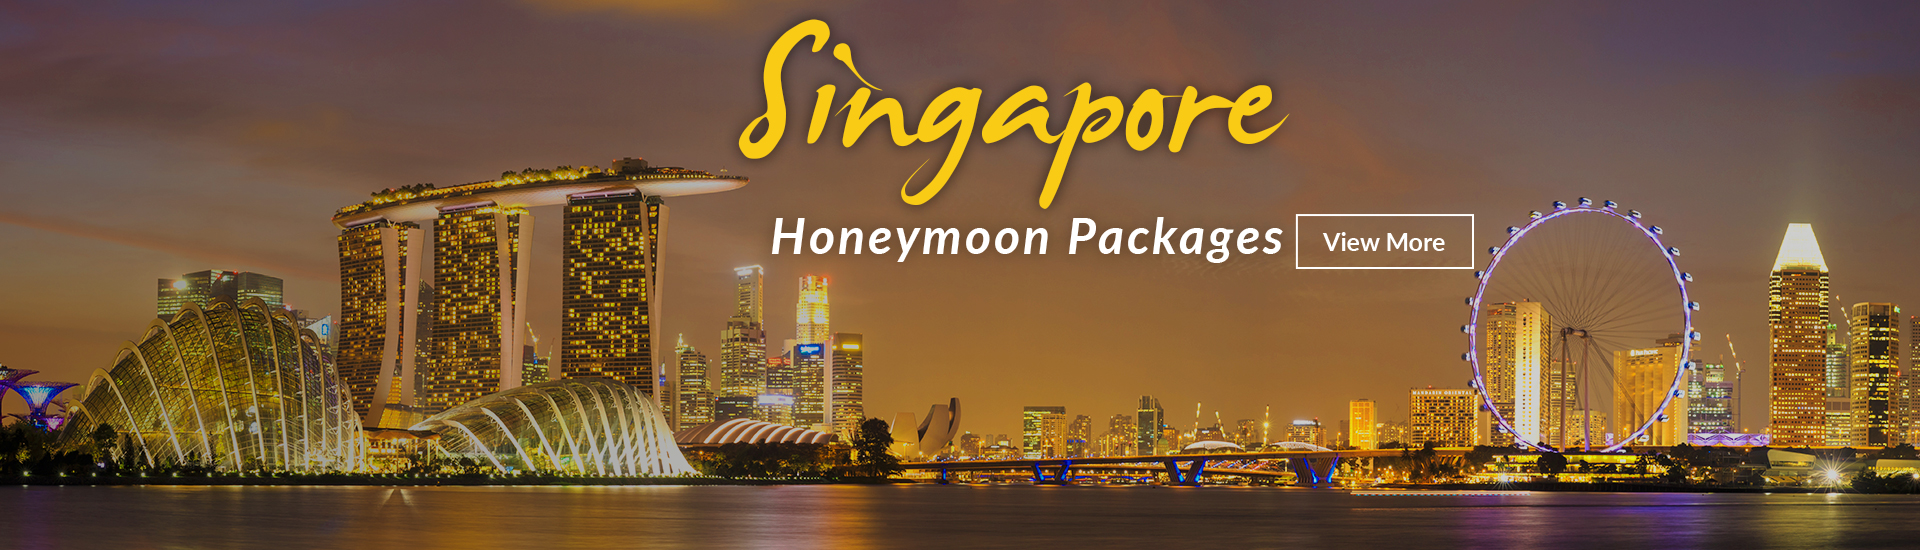 Honeymoon Packages Photos and Images | Shutterstock